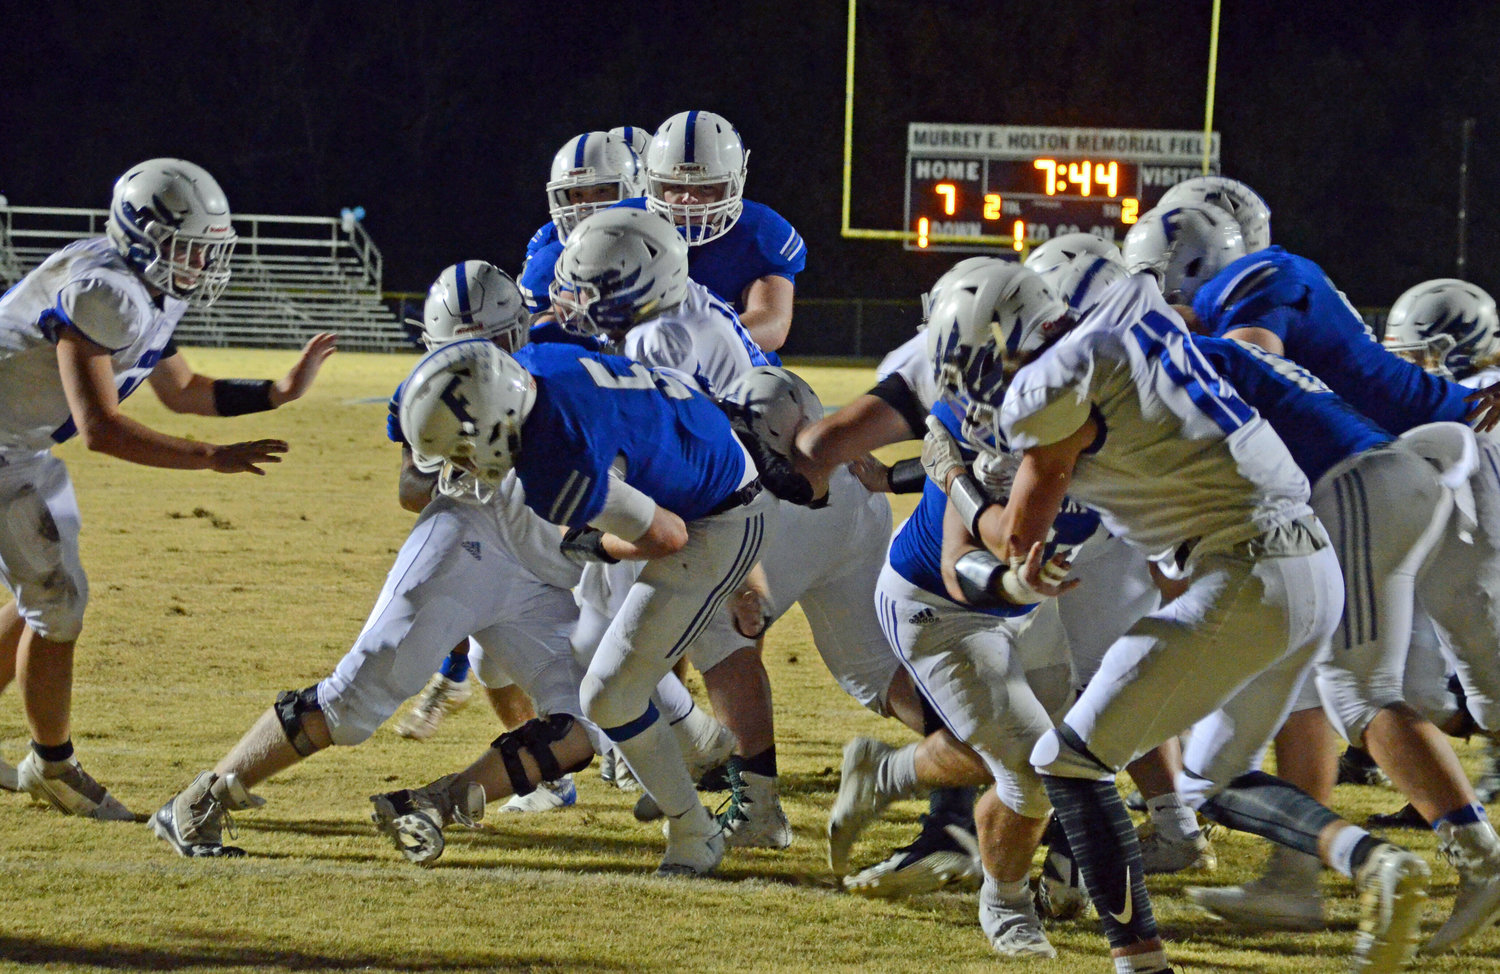 Forrest senior quarterback Max Kirby (5) bashes through the wall for a touchdown in the second quarter in the Rockets’ big 28-7 win over East Hickman in the first round of the TSSAA Class 2A playoffs at the Murrey E. Holton Memorial Field in Chapel Hill Friday night.